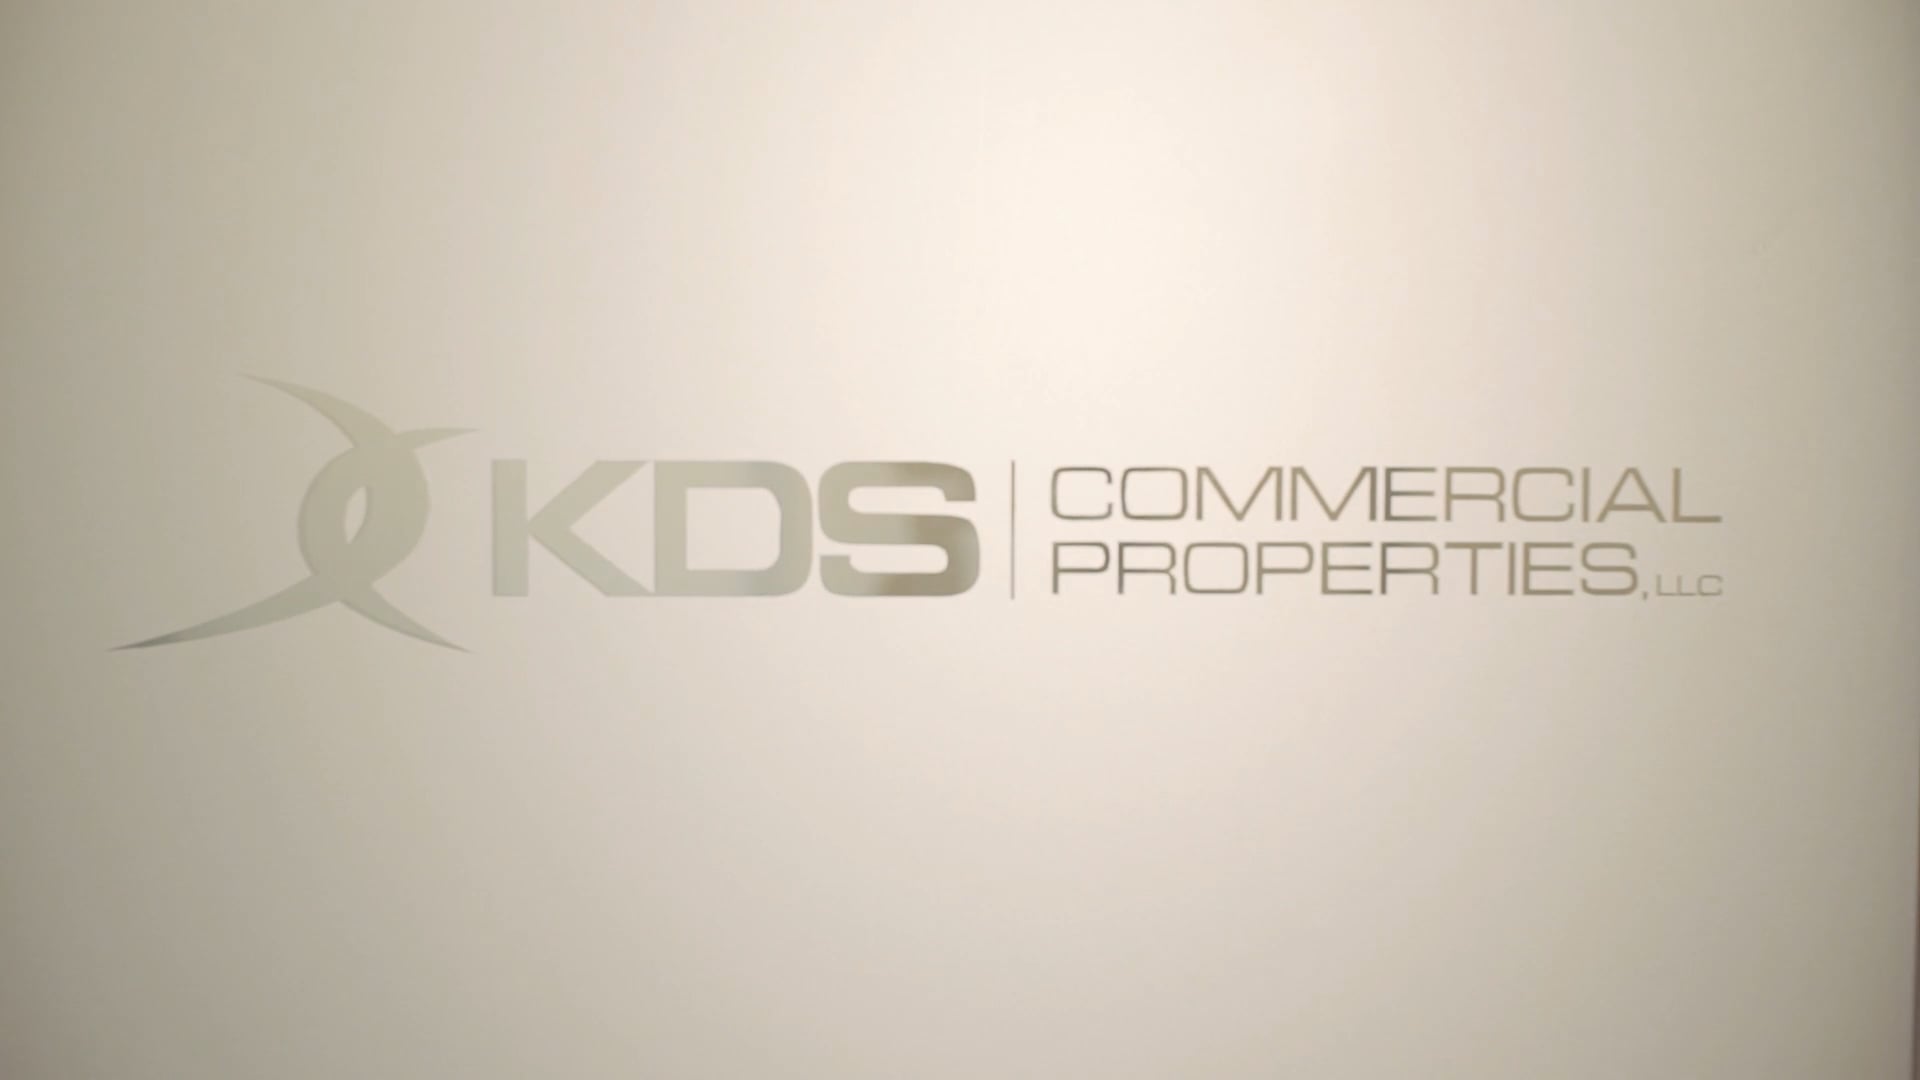 KDS COMMERCIAL PROPERTIES